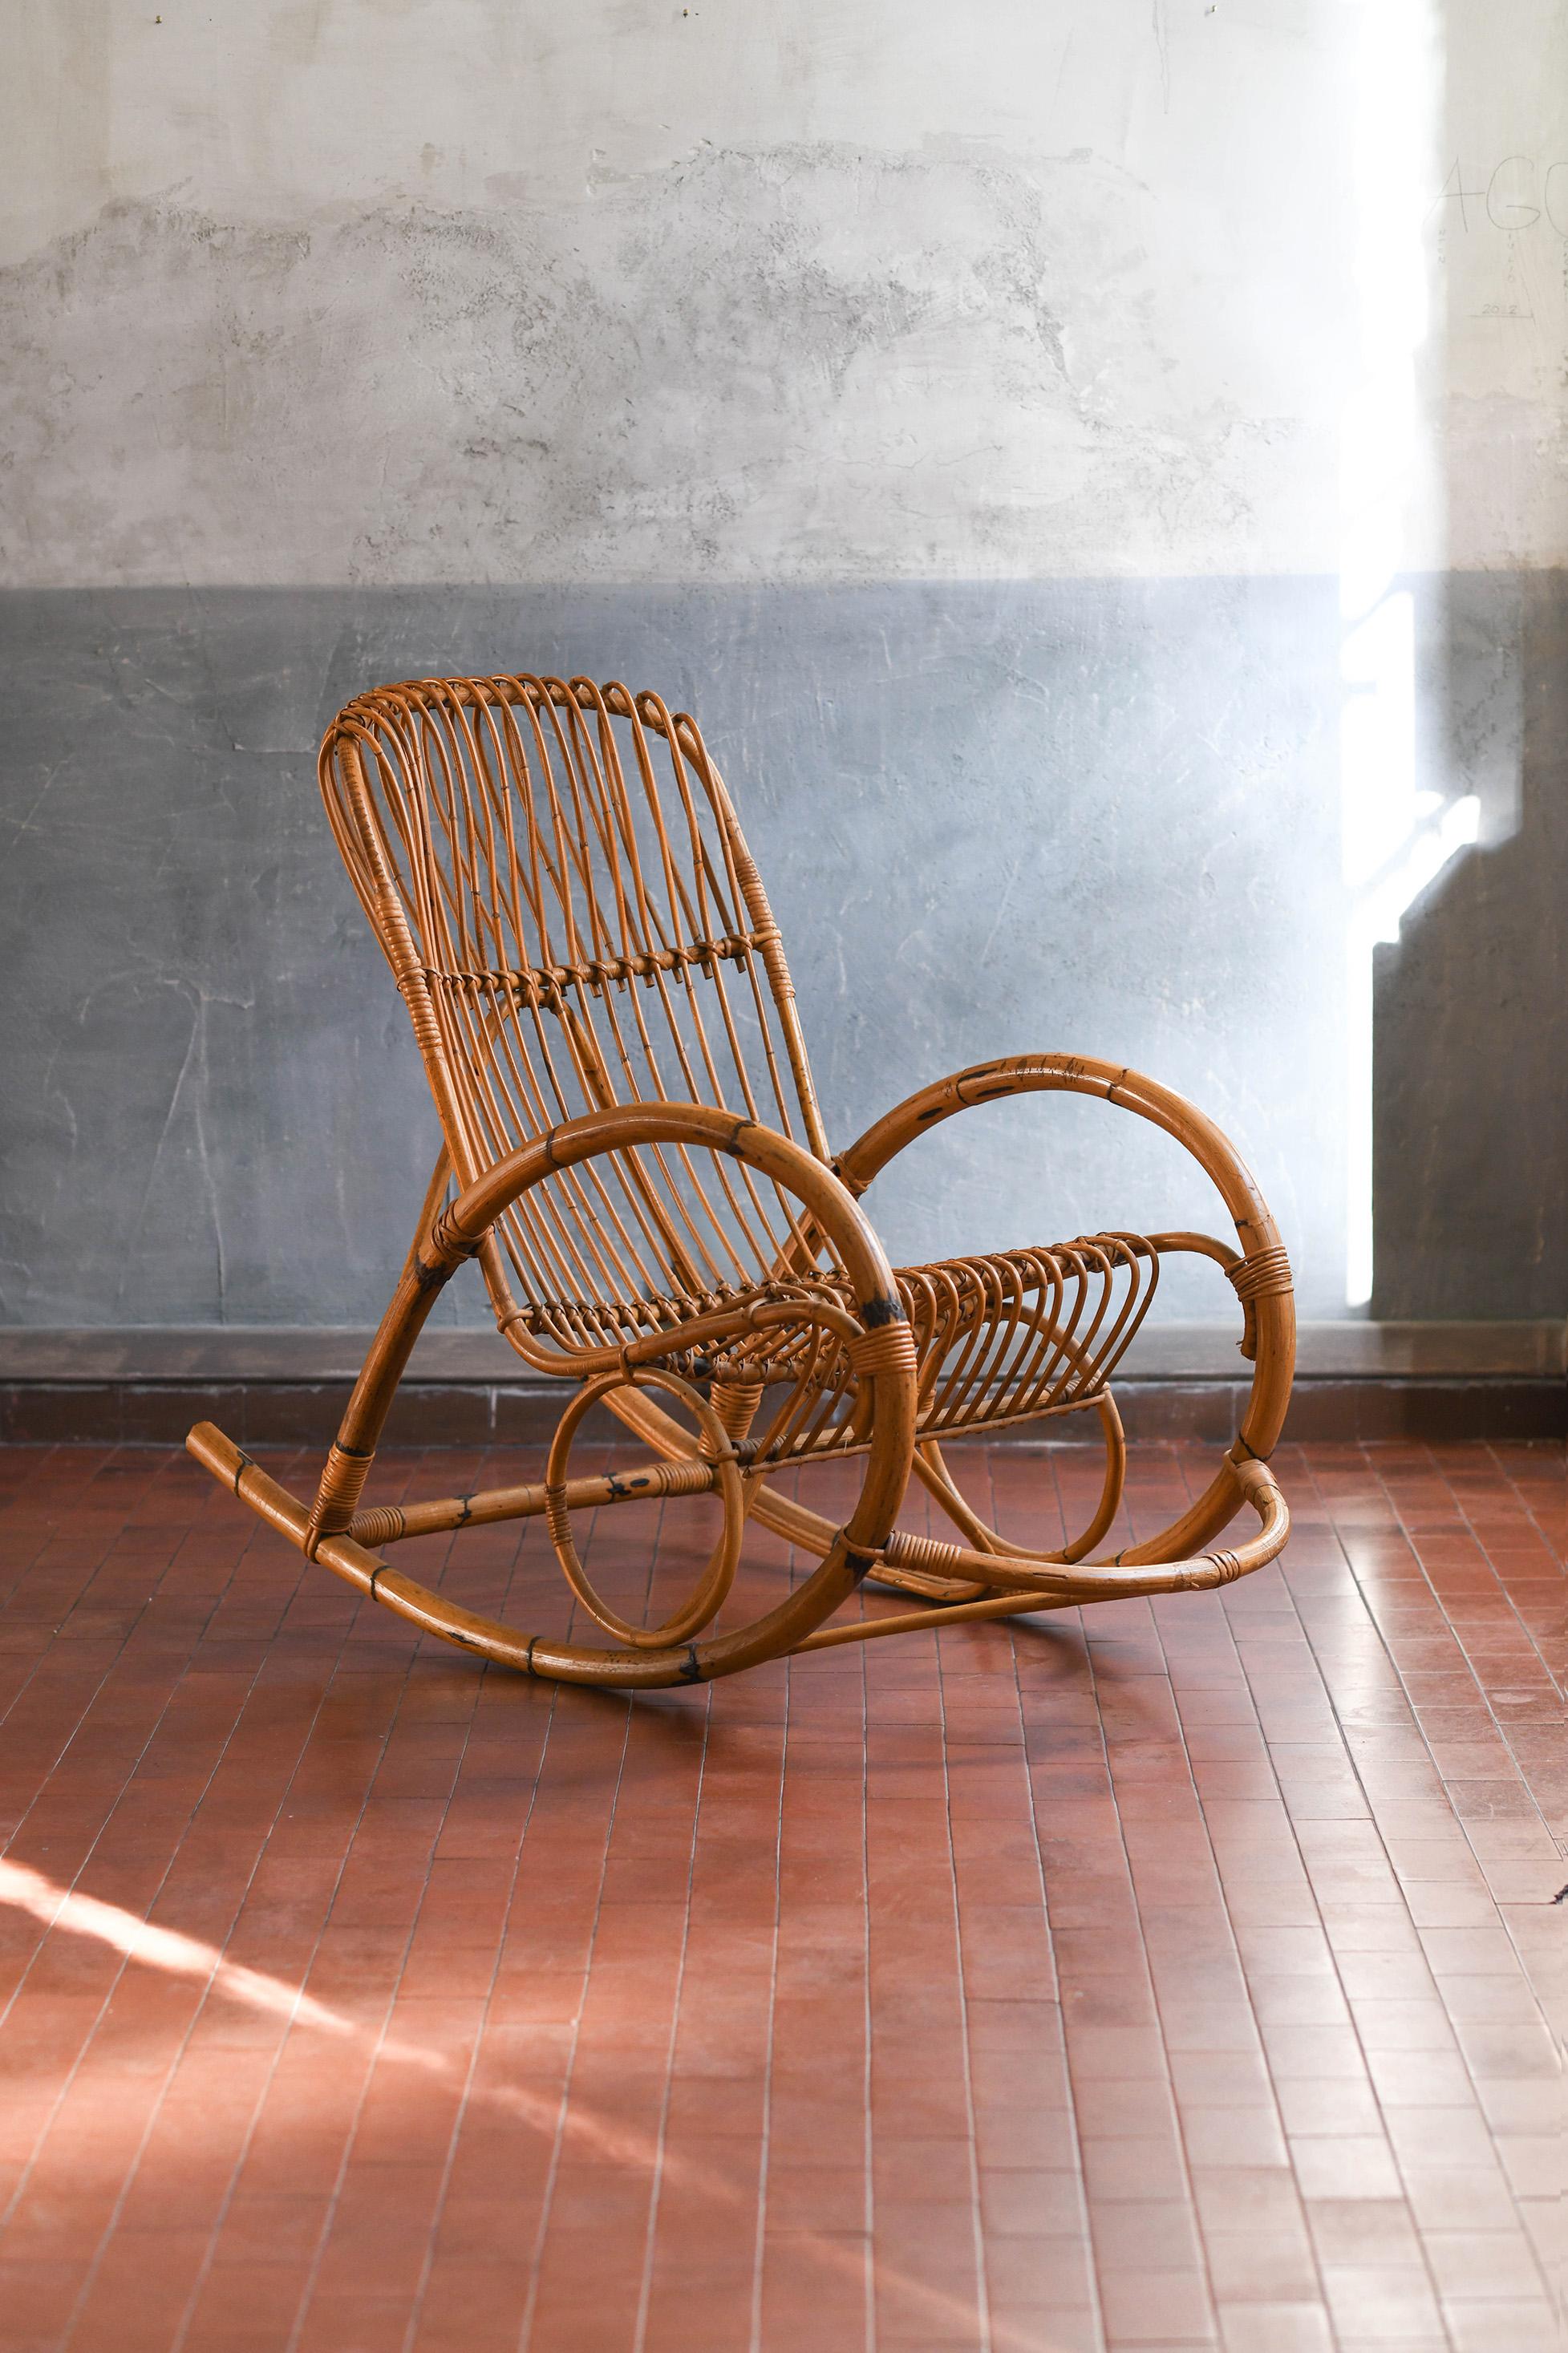 Rattan rocking chair, Italy 1980
Product details
Dimensions: 120 W x 97 H x 58 D cm